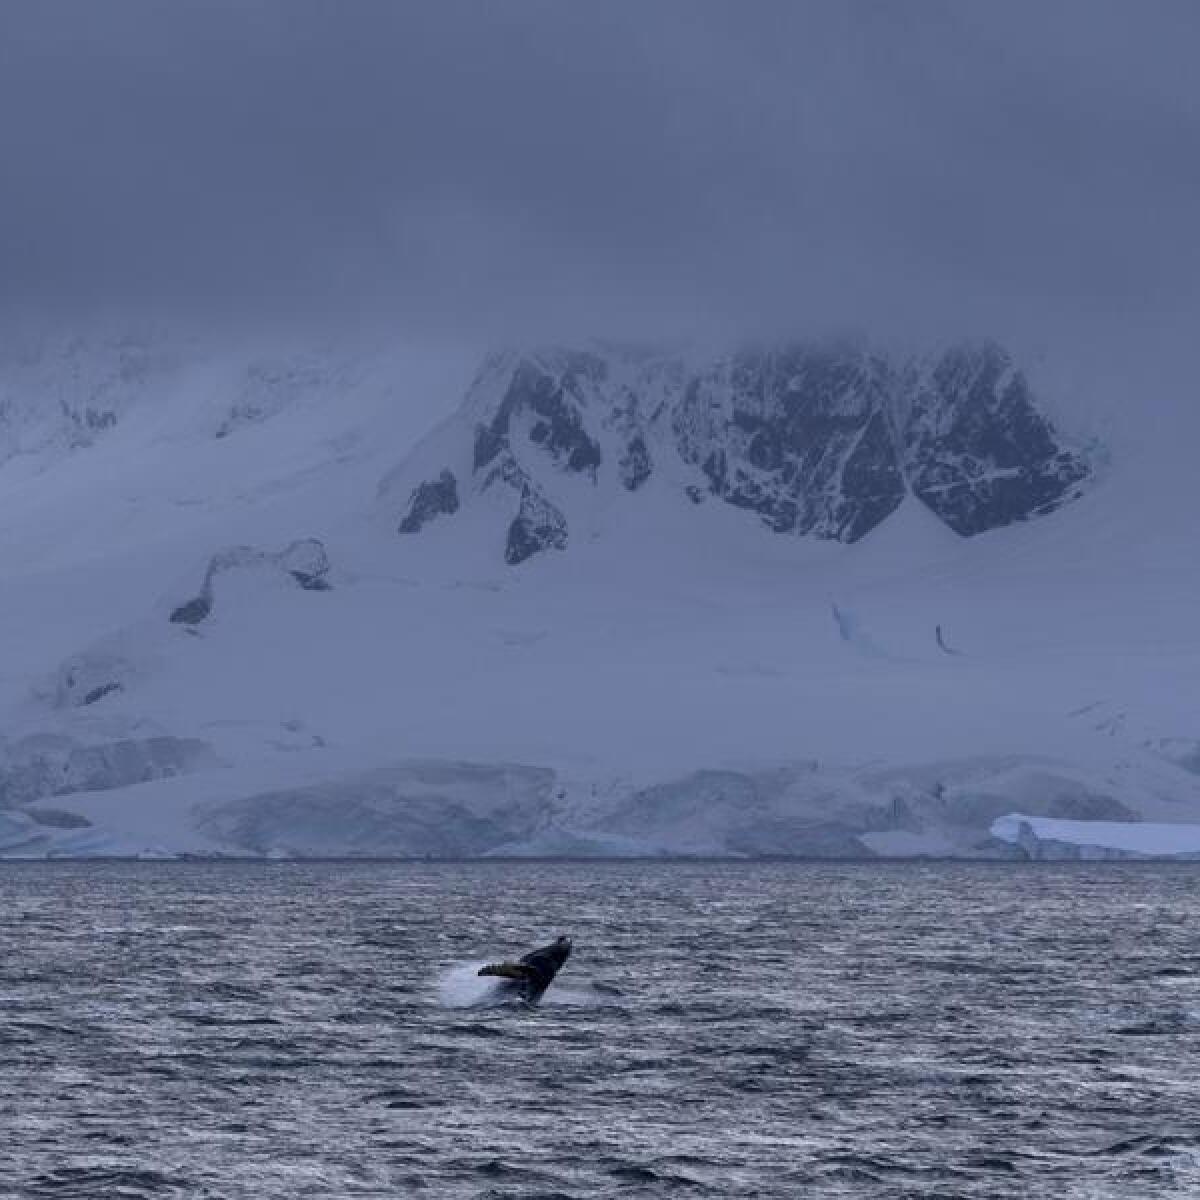 A whale breaches the surface of the Southern Ocean